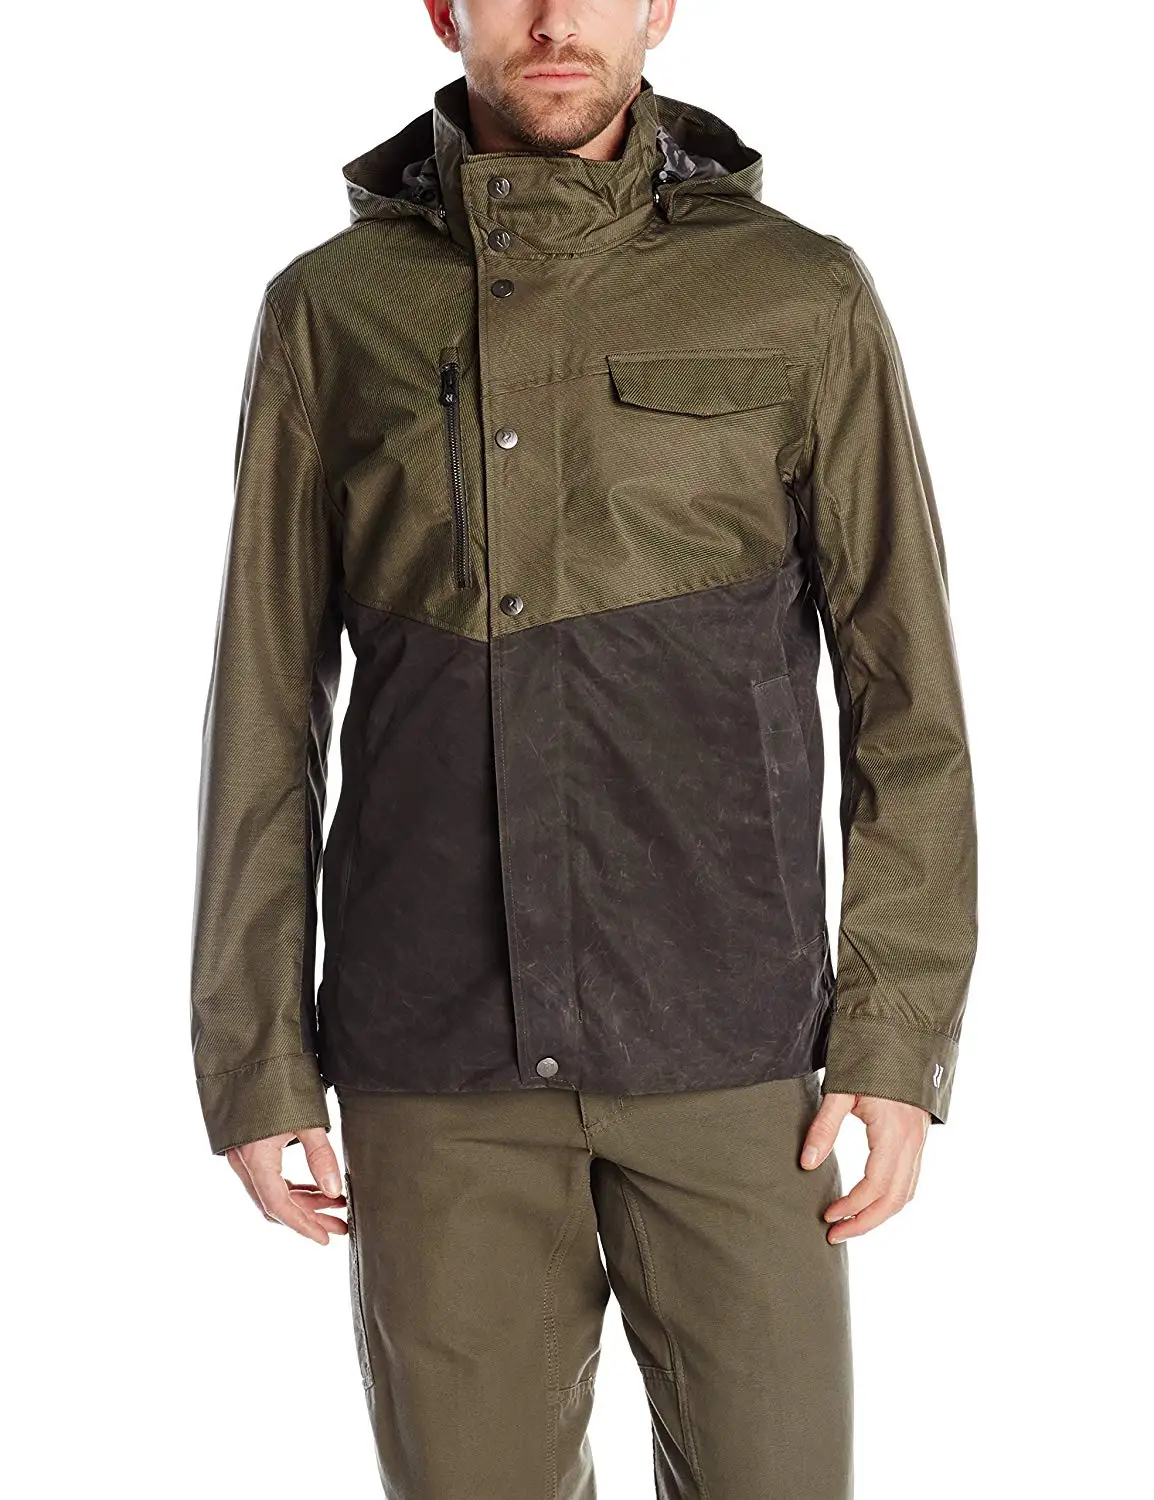 Cheap M Field Jacket, find M Field Jacket deals on line at Alibaba.com